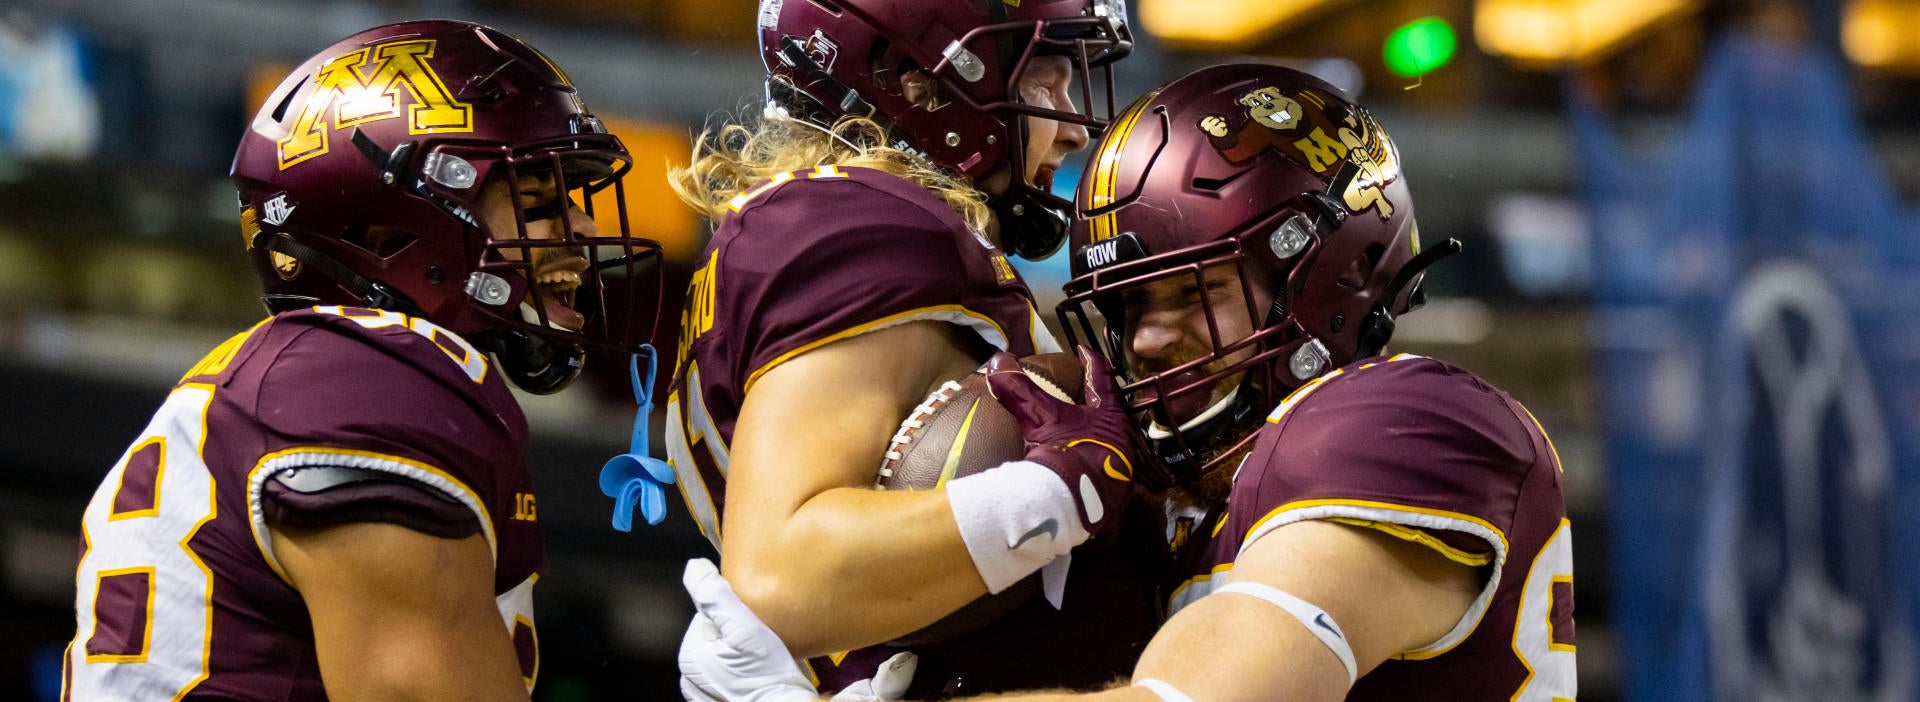 2023 Minnesota Golden Gophers win total betting strategy: P.J. Fleck rolling out new-look offense